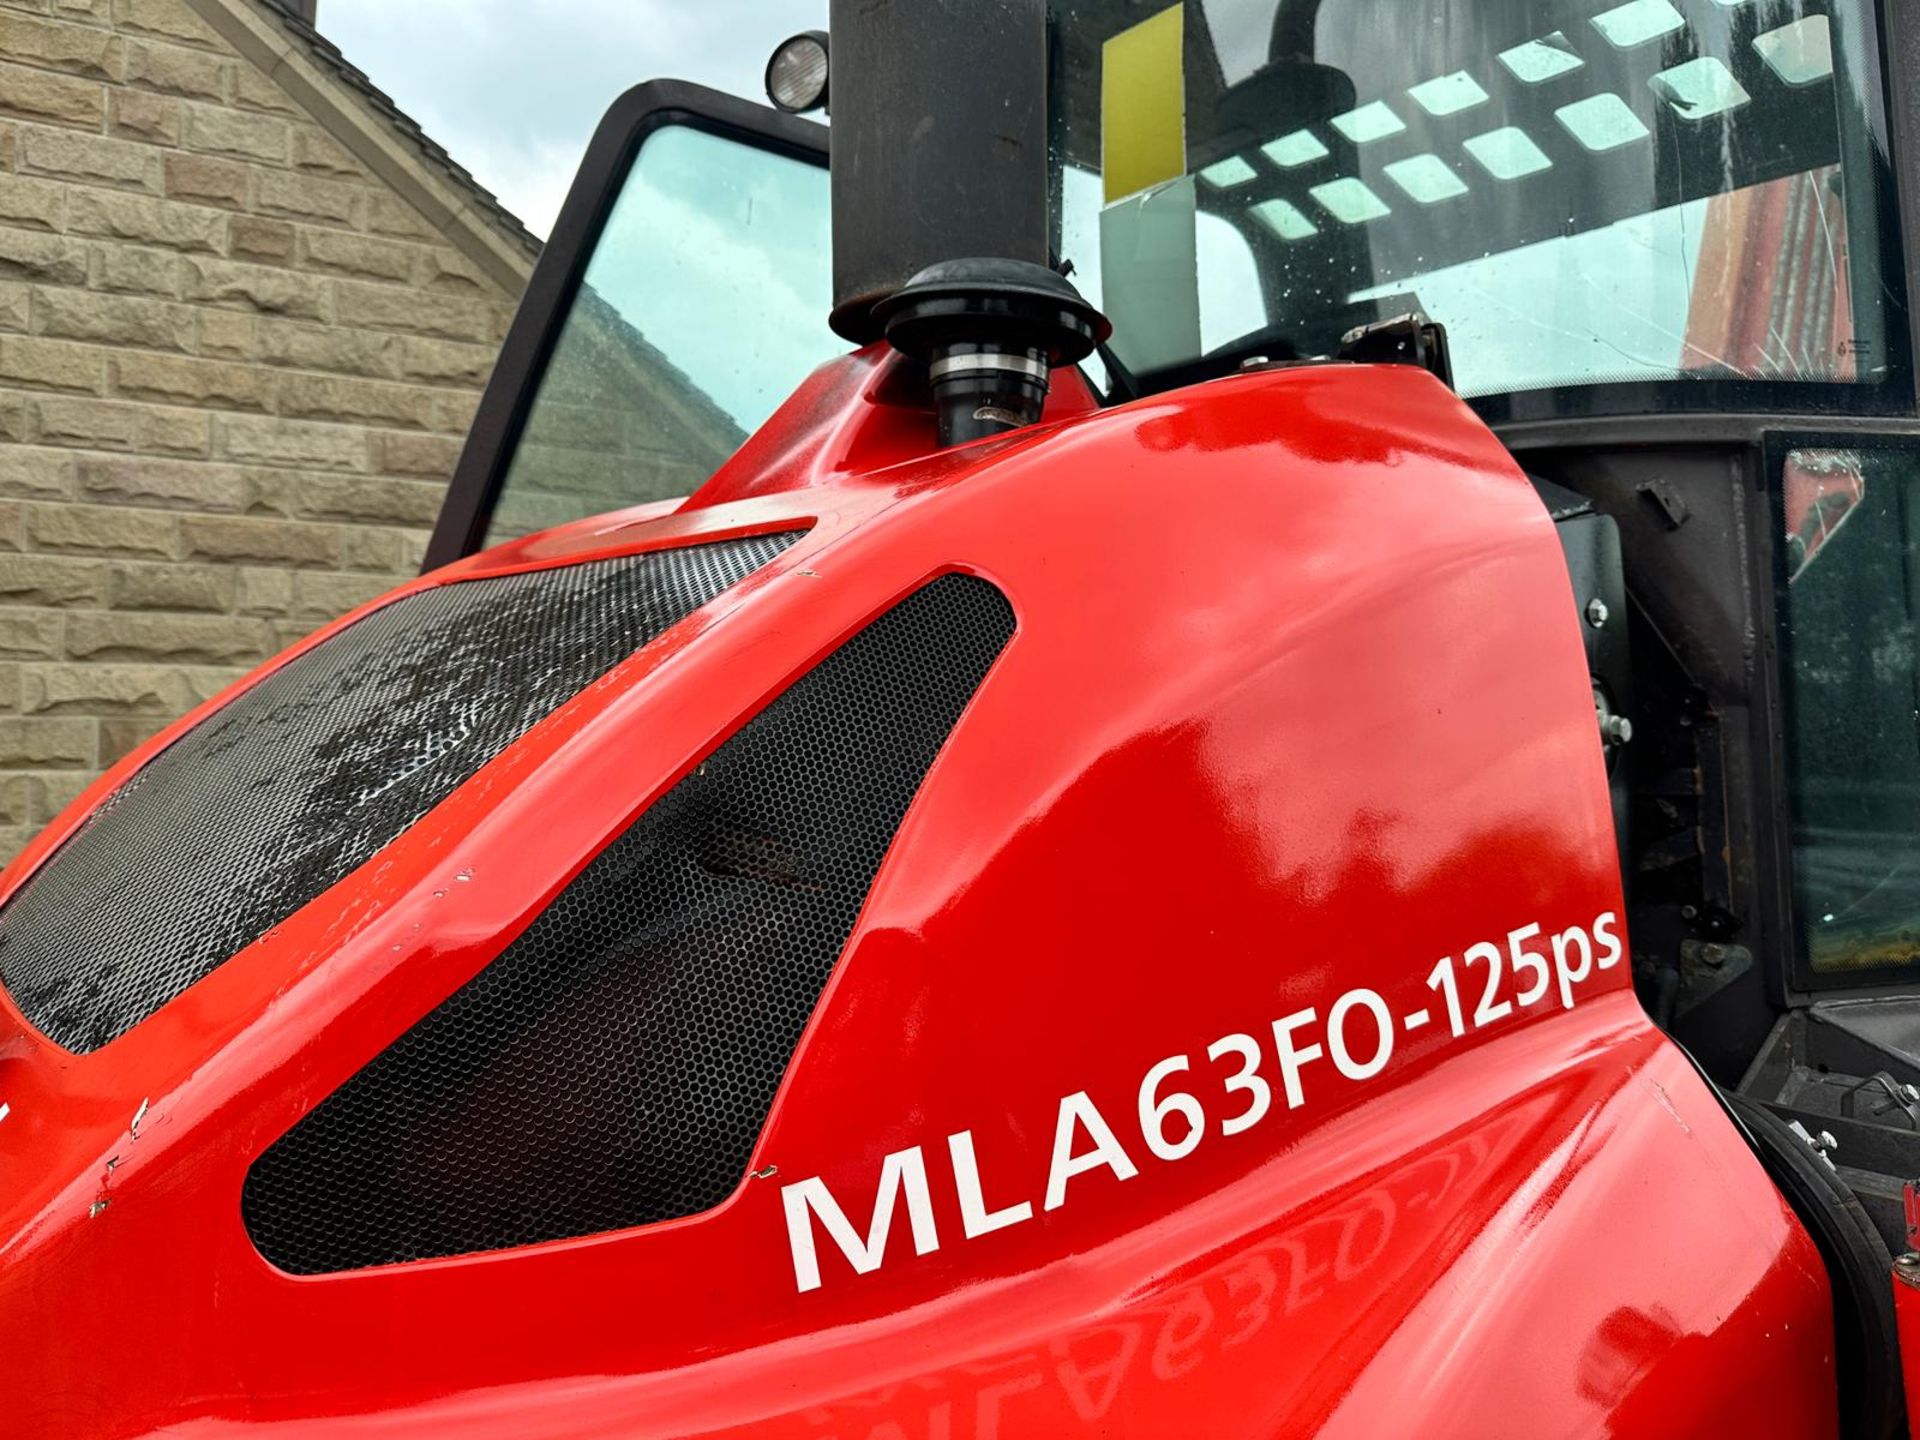 2013/14 Manitou MLA63FO-125ps 4WD Articulated Telescopic Forklift/Telehandler *PLUS VAT* - Image 18 of 20